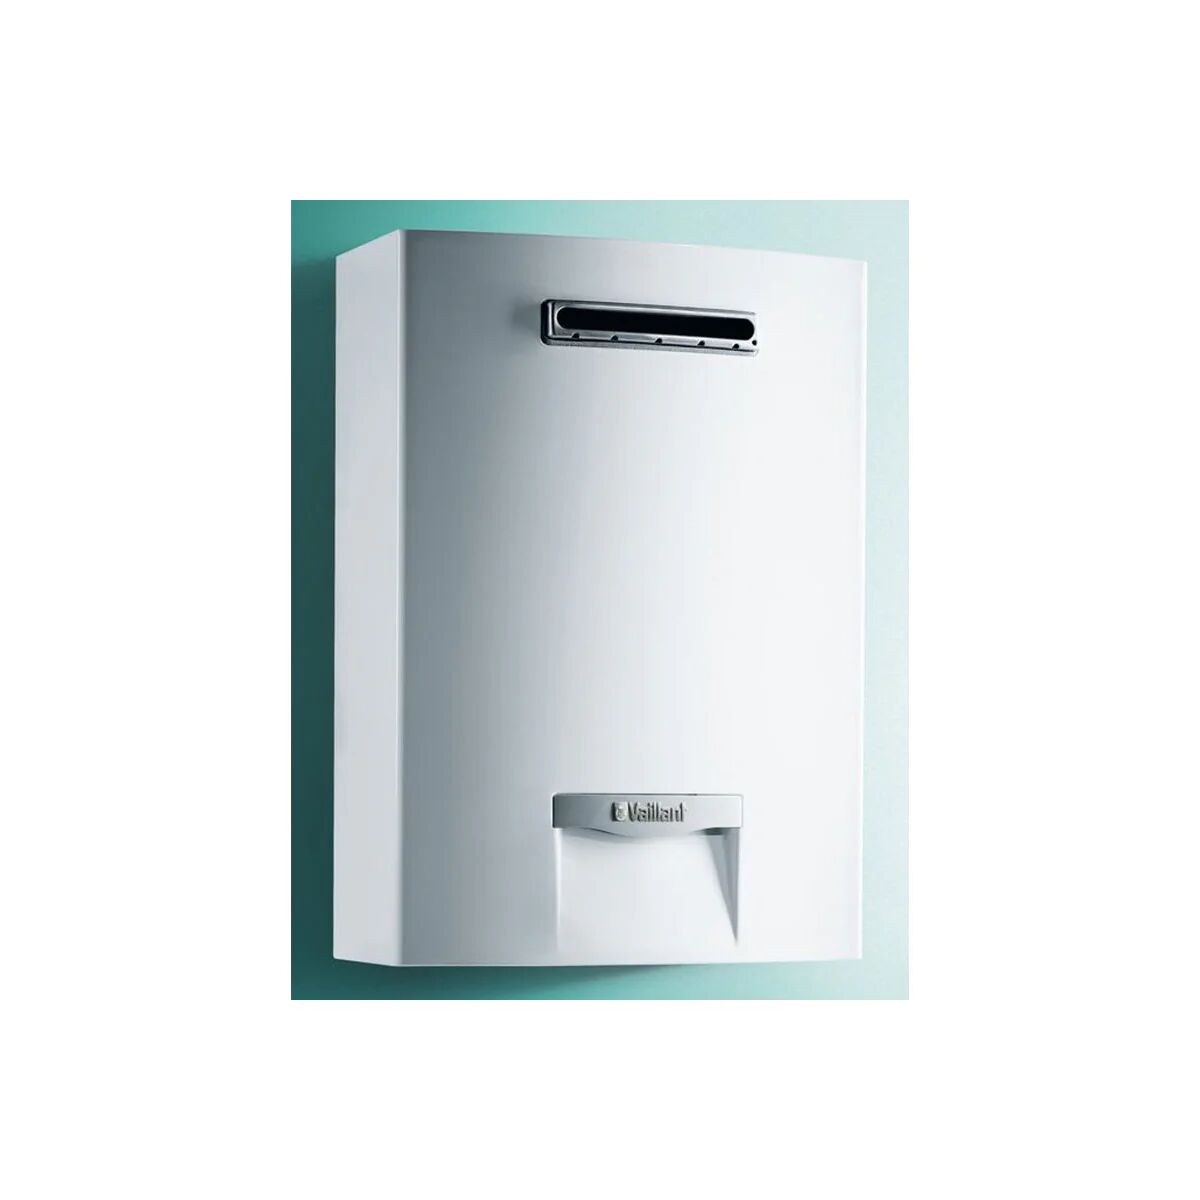 Scaldabagno Vaillant Outsidemag 178/1-5 Camera Stagna 17 Lt Low Nox Metano A (10022469)